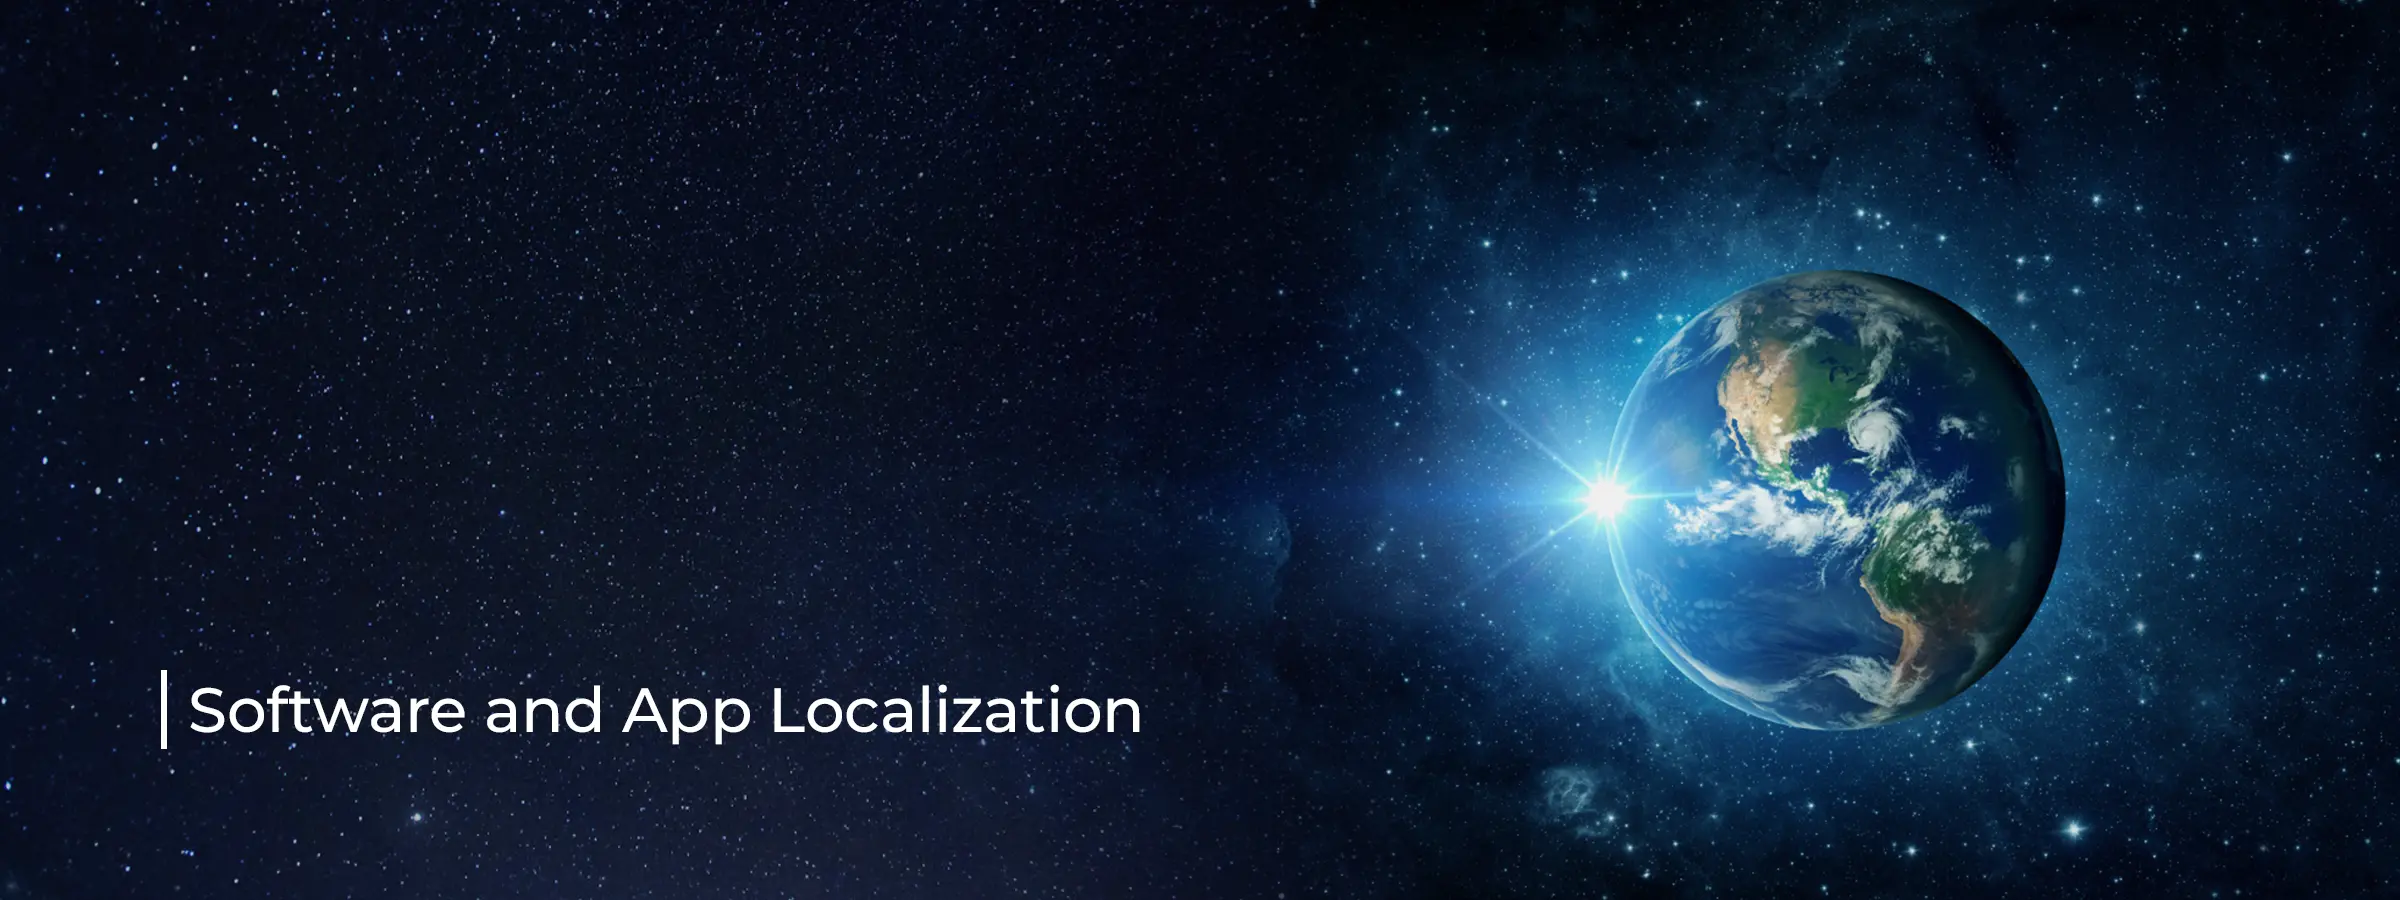 software-and-app-localization-service-banner